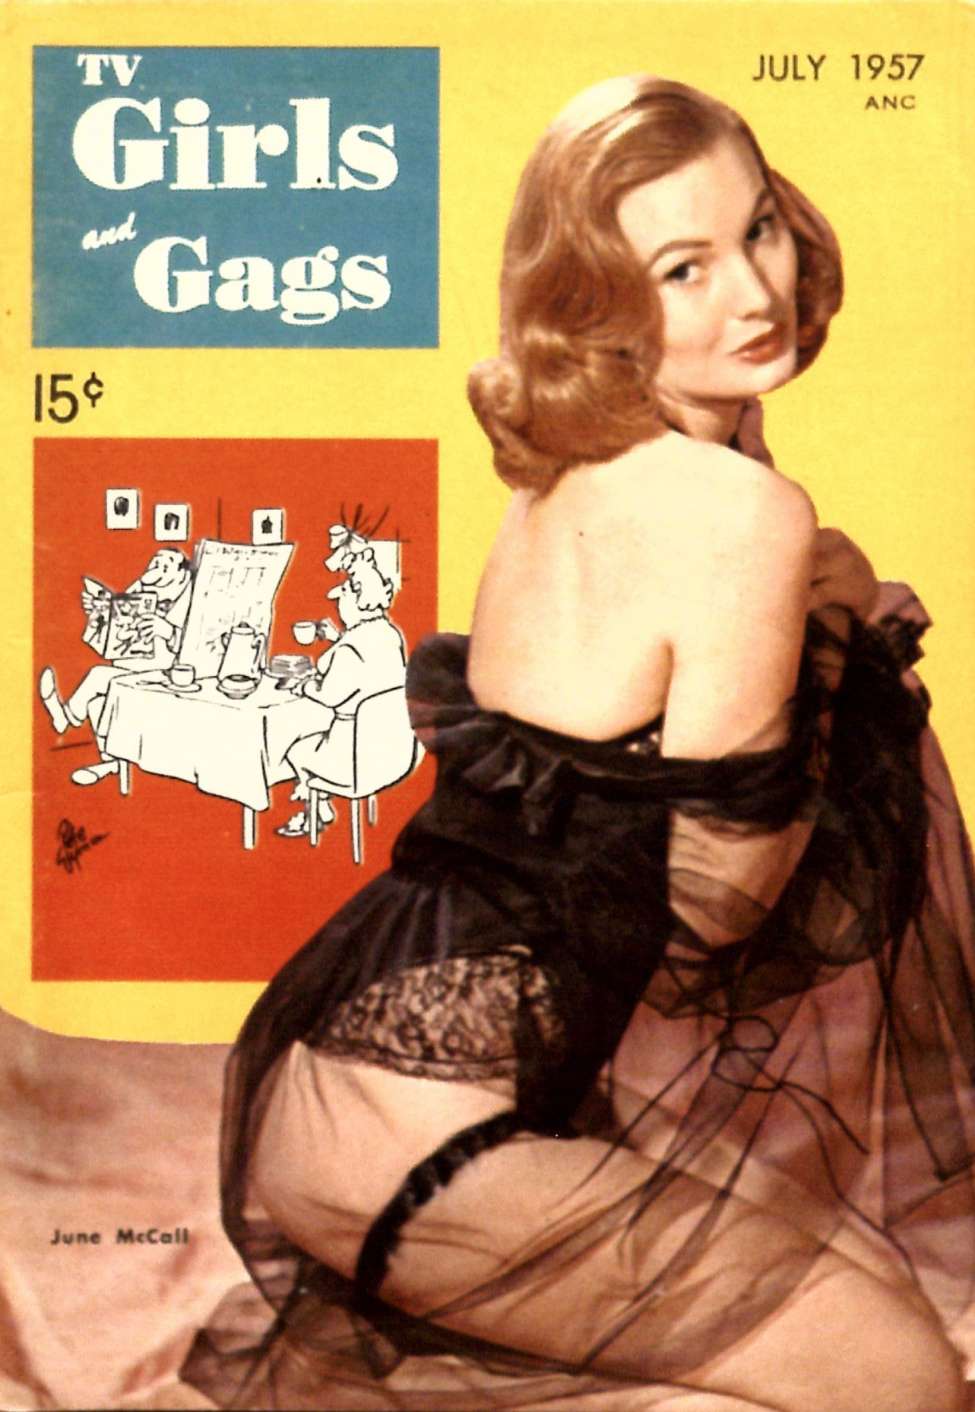 Book Cover For TV Girls and Gags v4 4